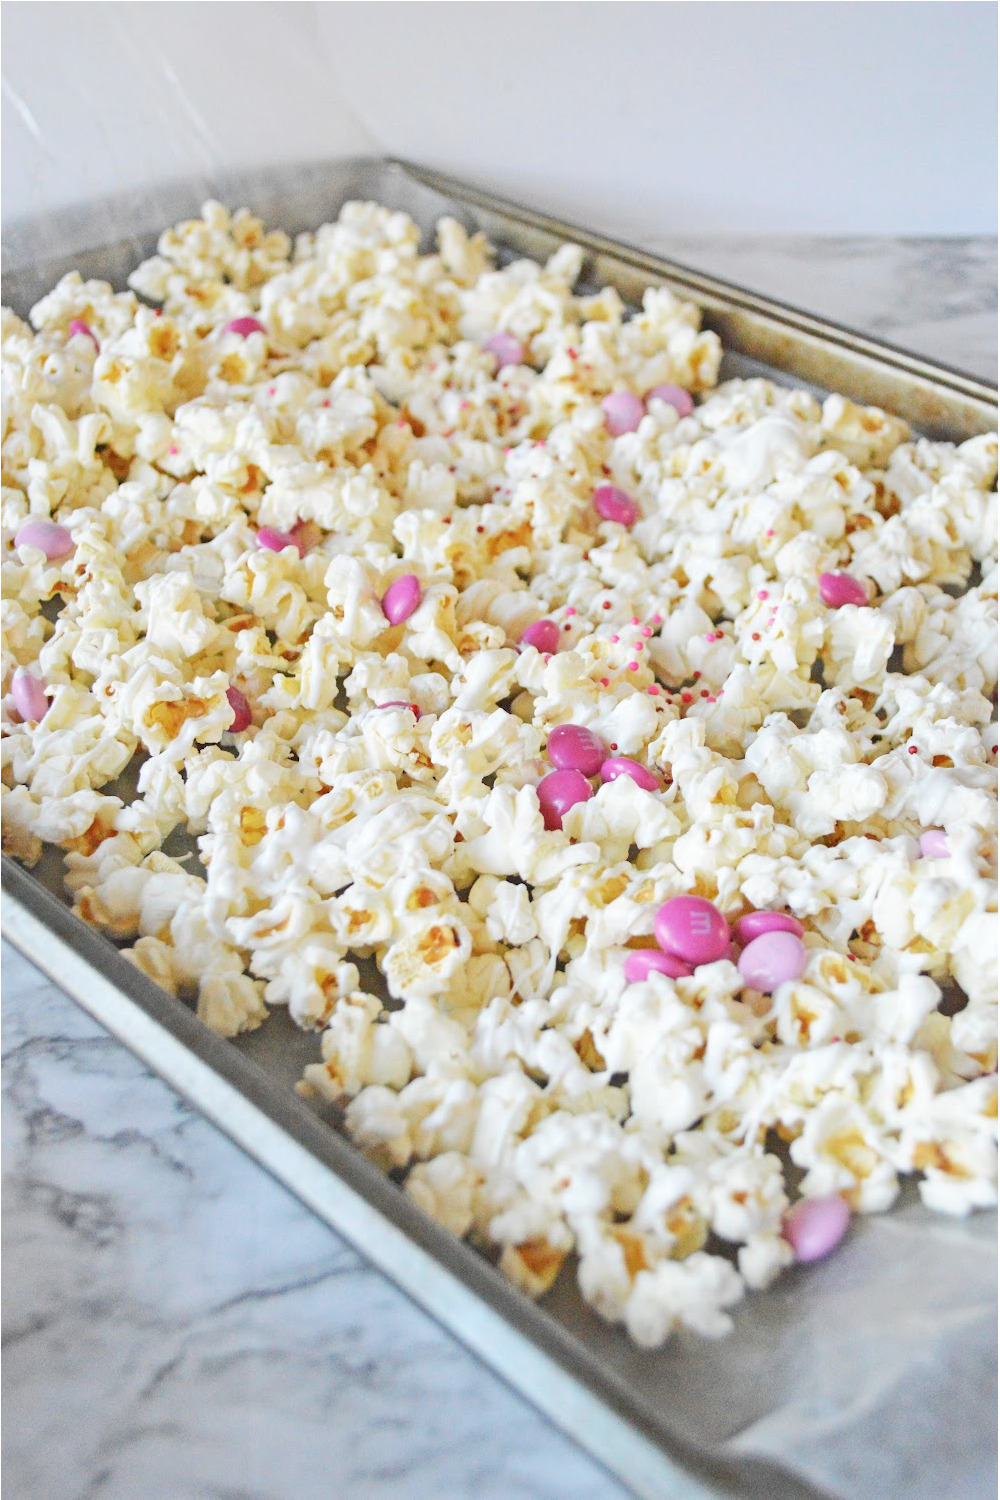 popcorn spread on a baking sheet with white candy melts drizzled on top plus pink M&Ms on top.